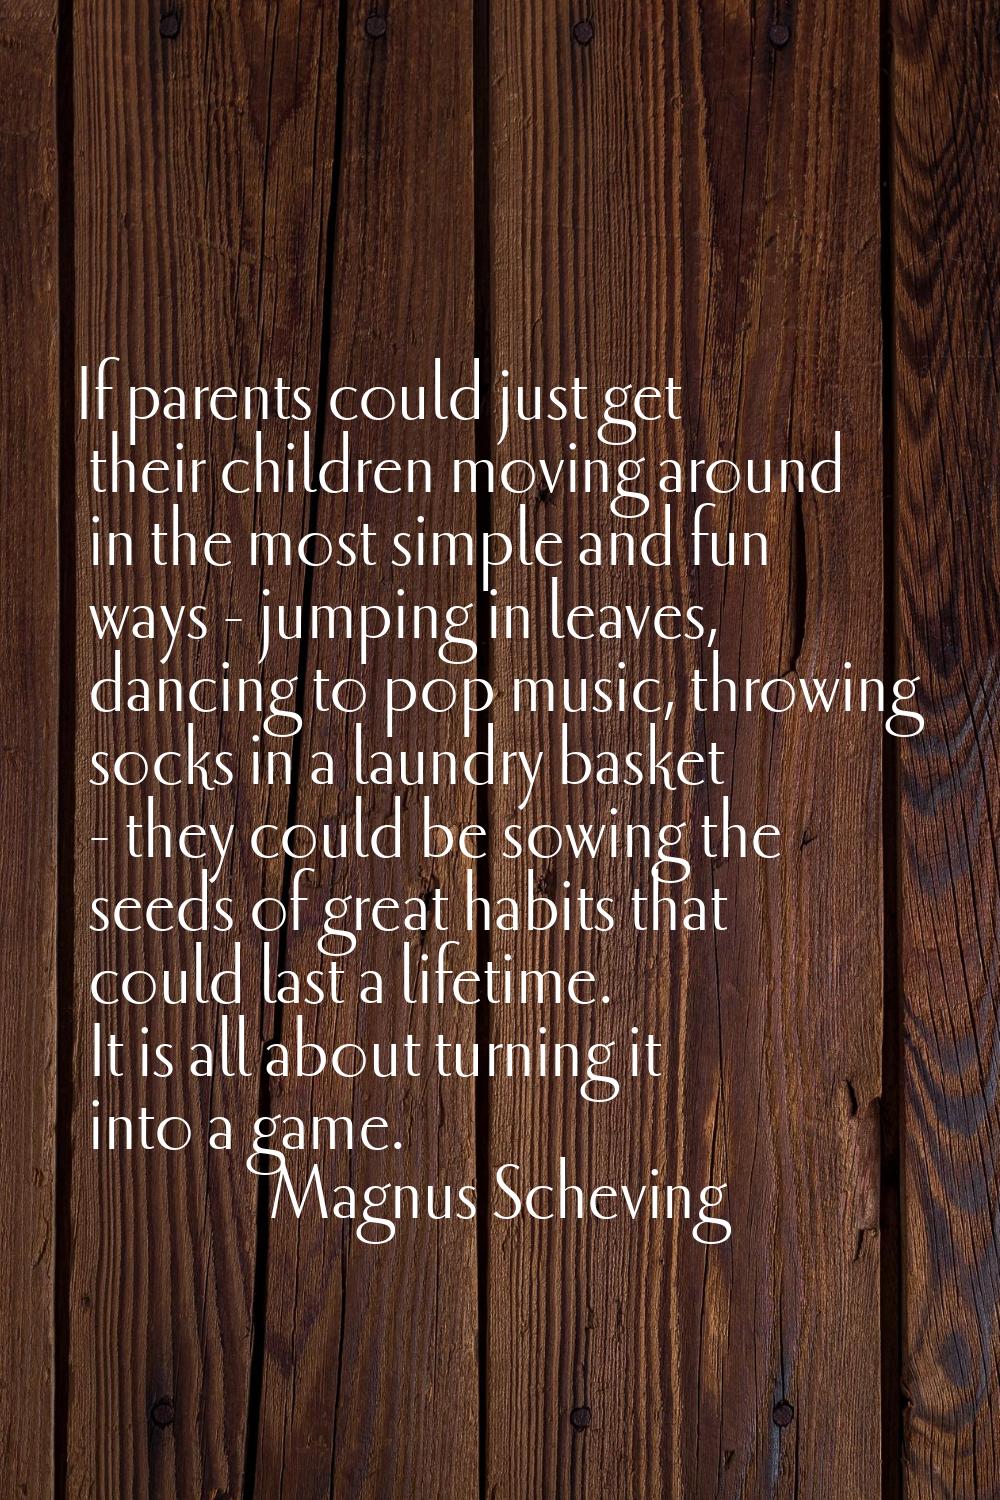 If parents could just get their children moving around in the most simple and fun ways - jumping in